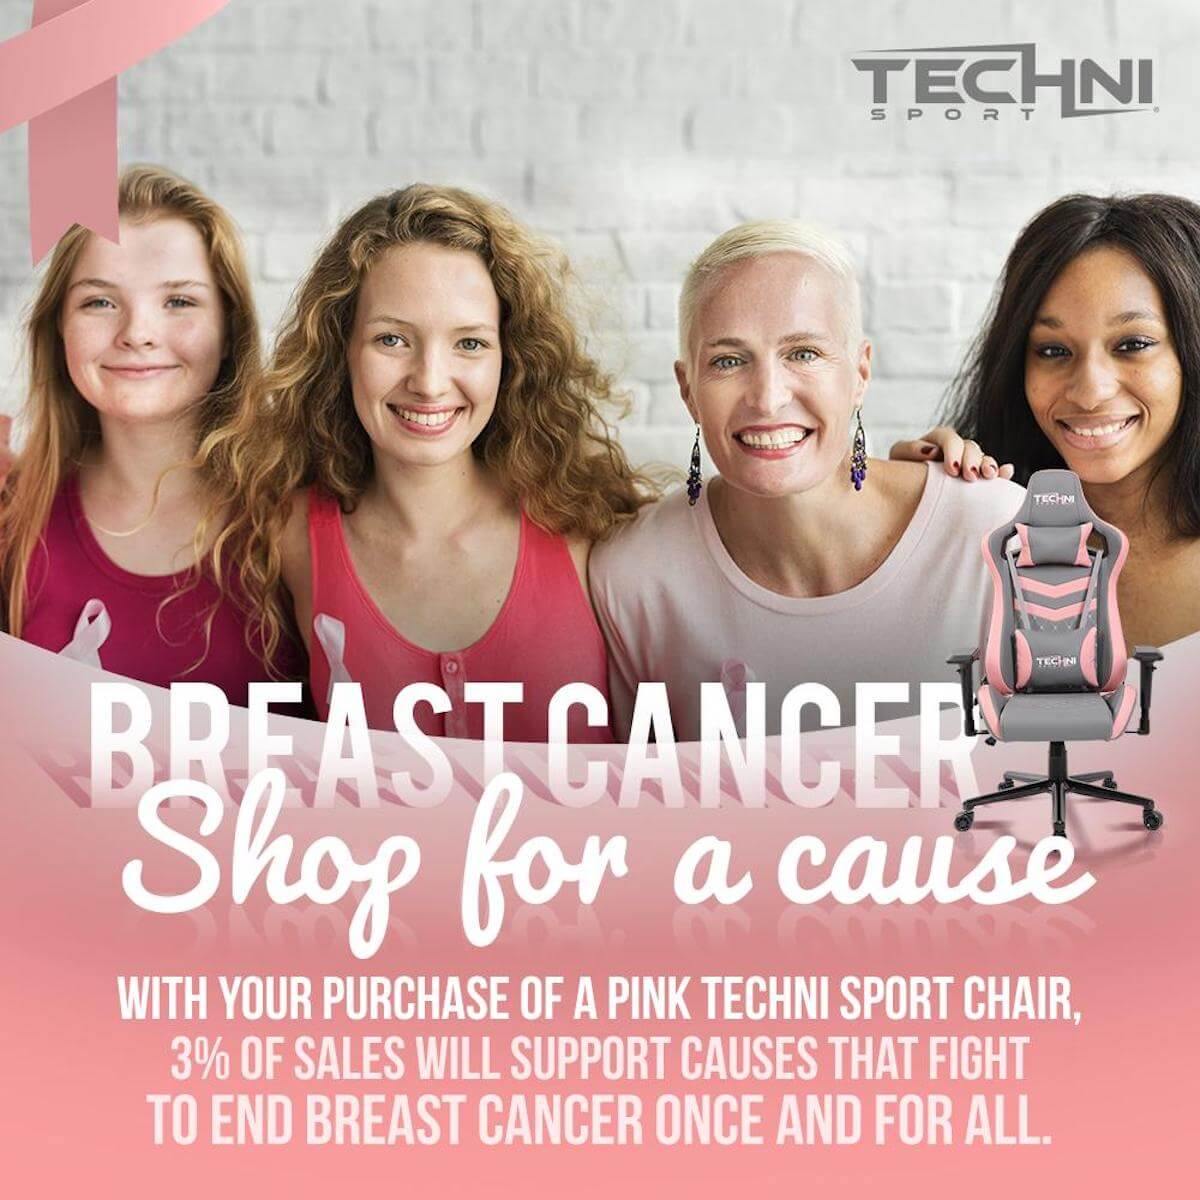 Techni Sport TS-83 Pink Ergonomic High Black Racer Style PC Gaming Chair RTA-TS83-GRY-PNK Breast Cancer Charity #color_pink